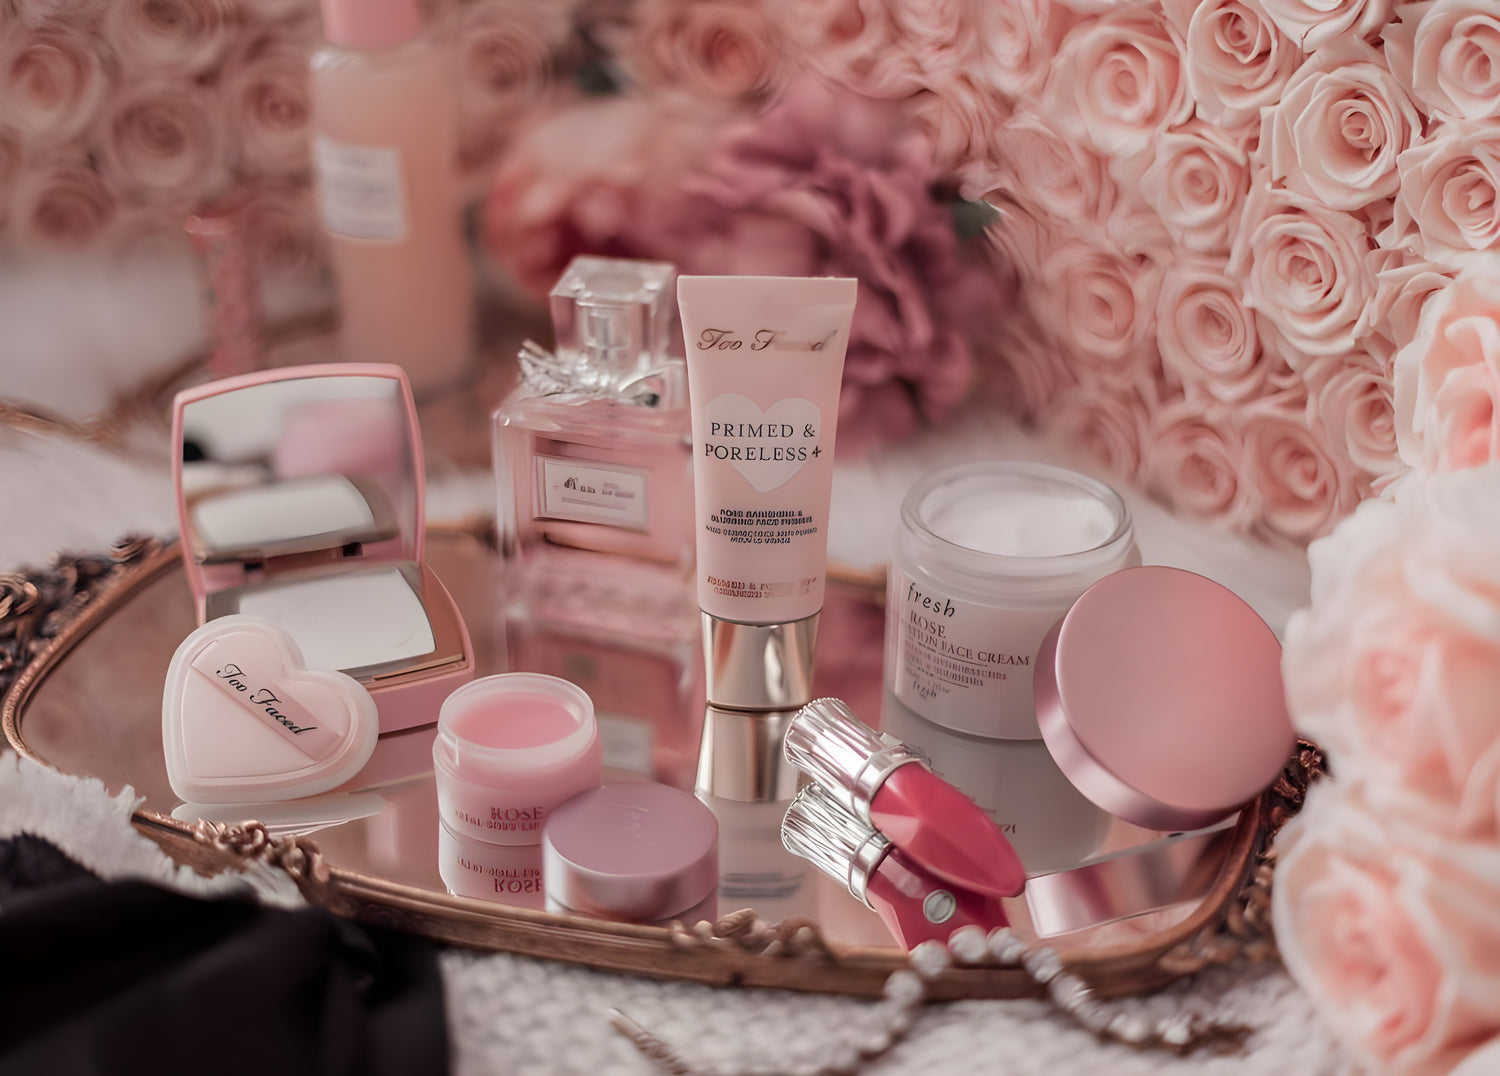 Cosmetics & Beauty Products